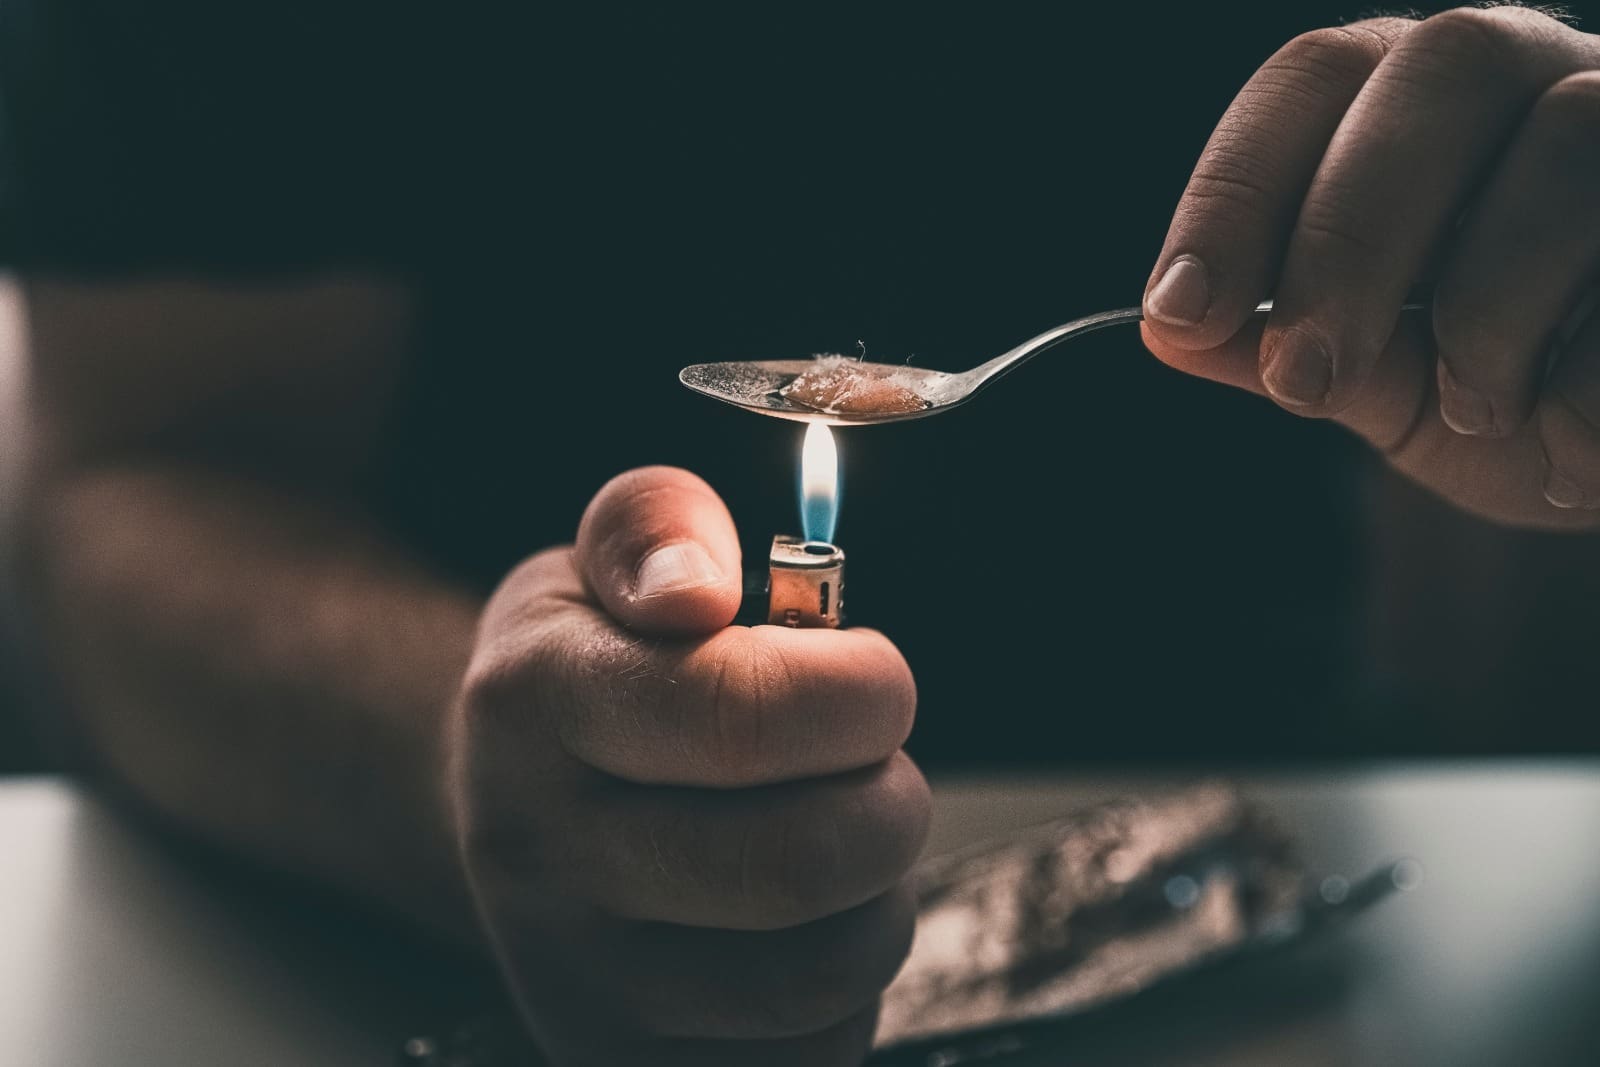 Signs Of Heroin Use You Need To Know